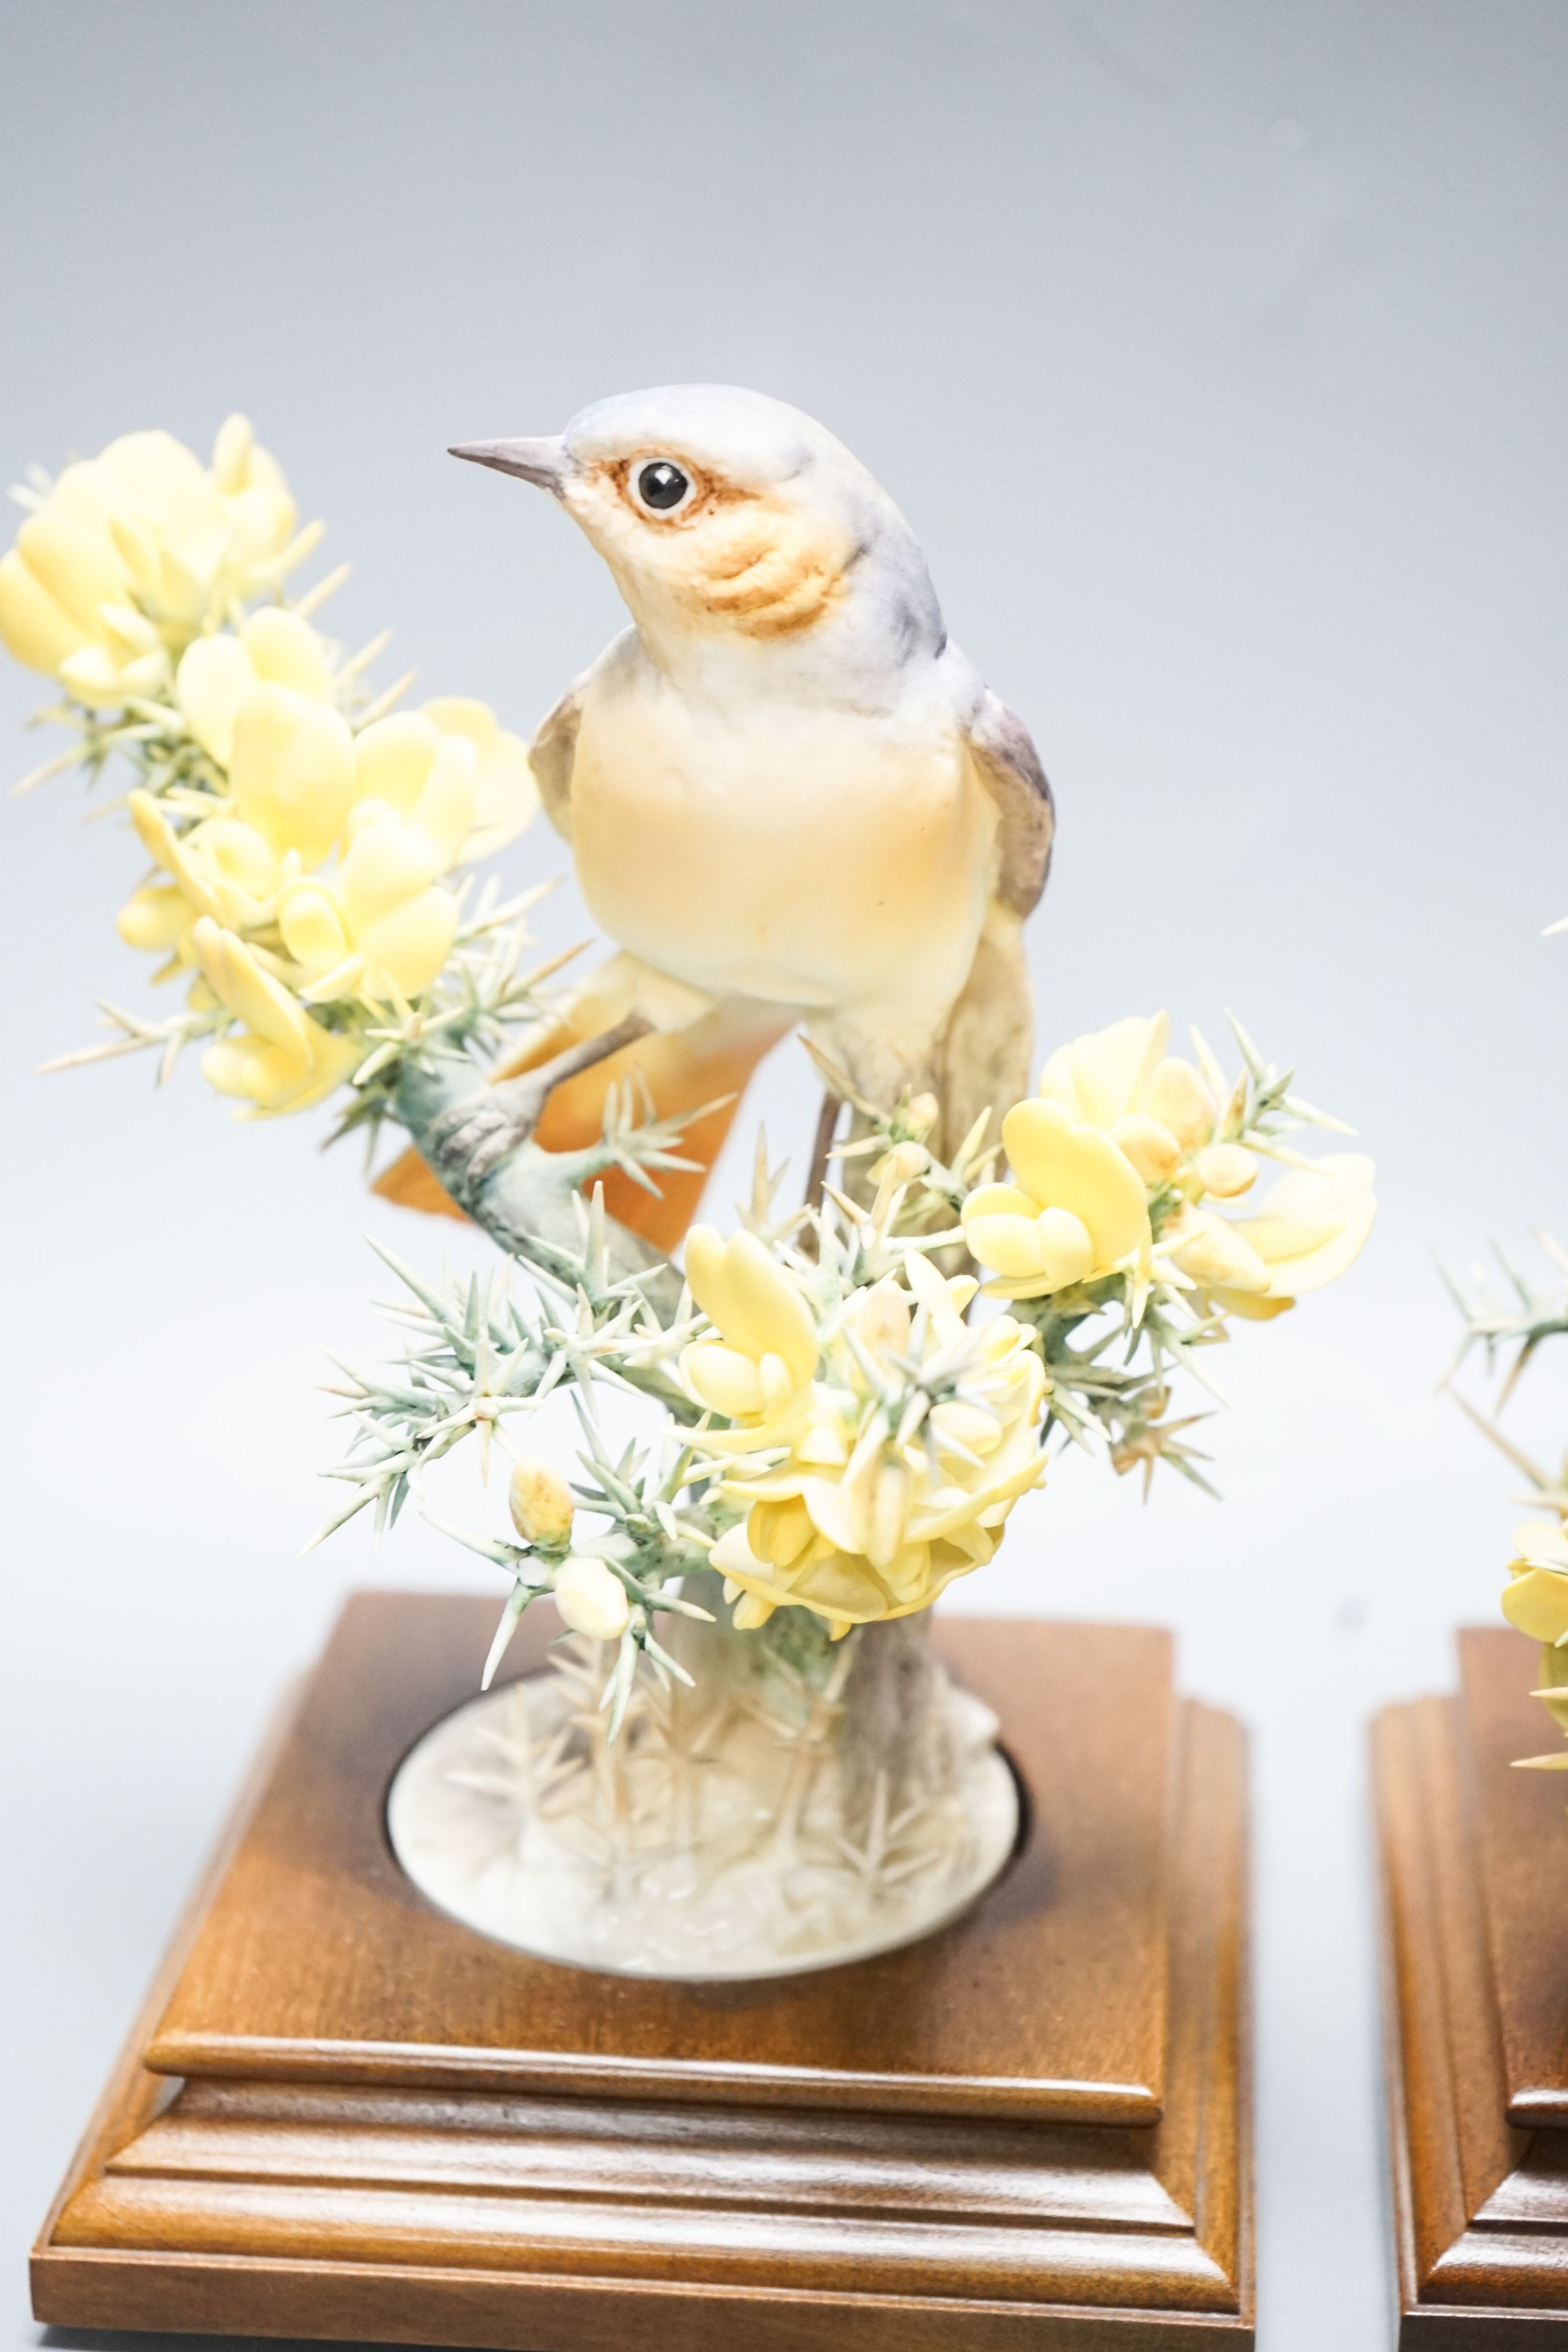 Three Royal Worcester porcelain groups of birds, modelled by Dorothy Doughty - ‘’Redstart and Gorse’’, (hen and cock) and ‘’Meadow Pipit and Silverweed’’, each with certificates